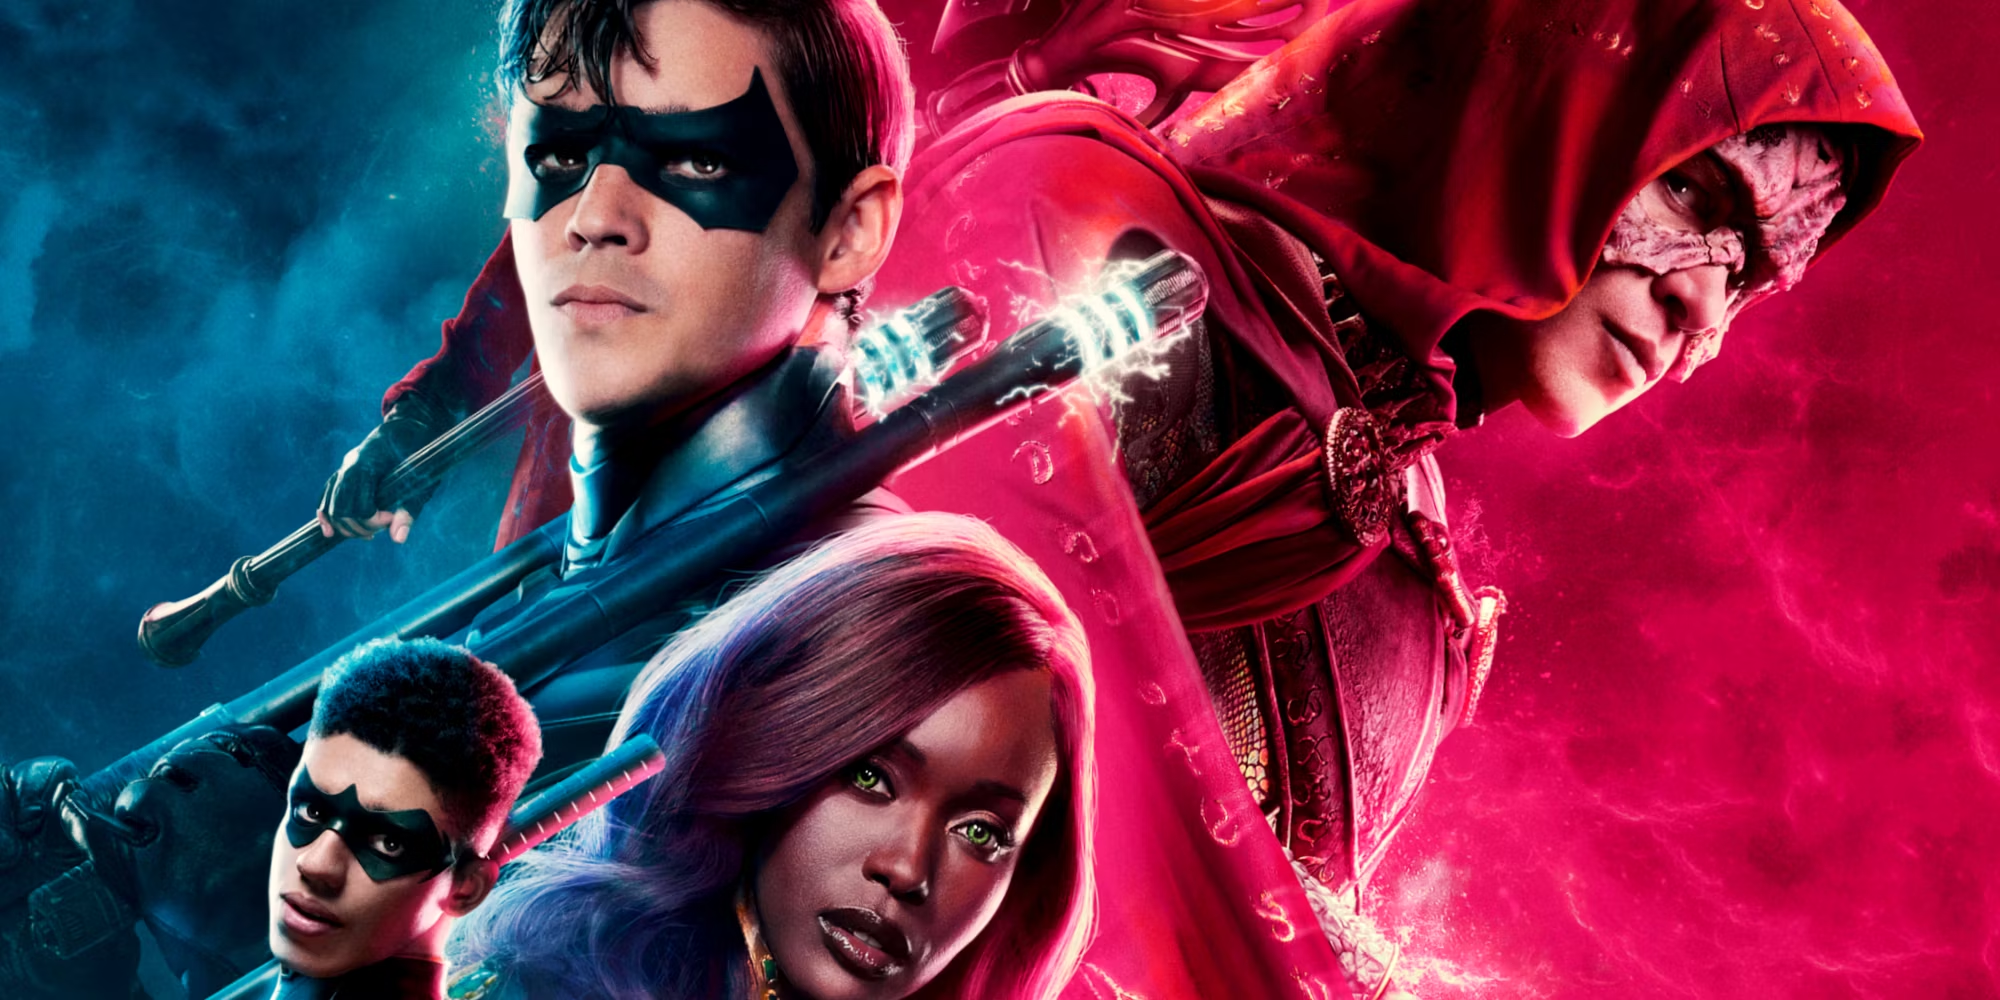 Titans Season 3 release date and cast latest: When is it coming out?